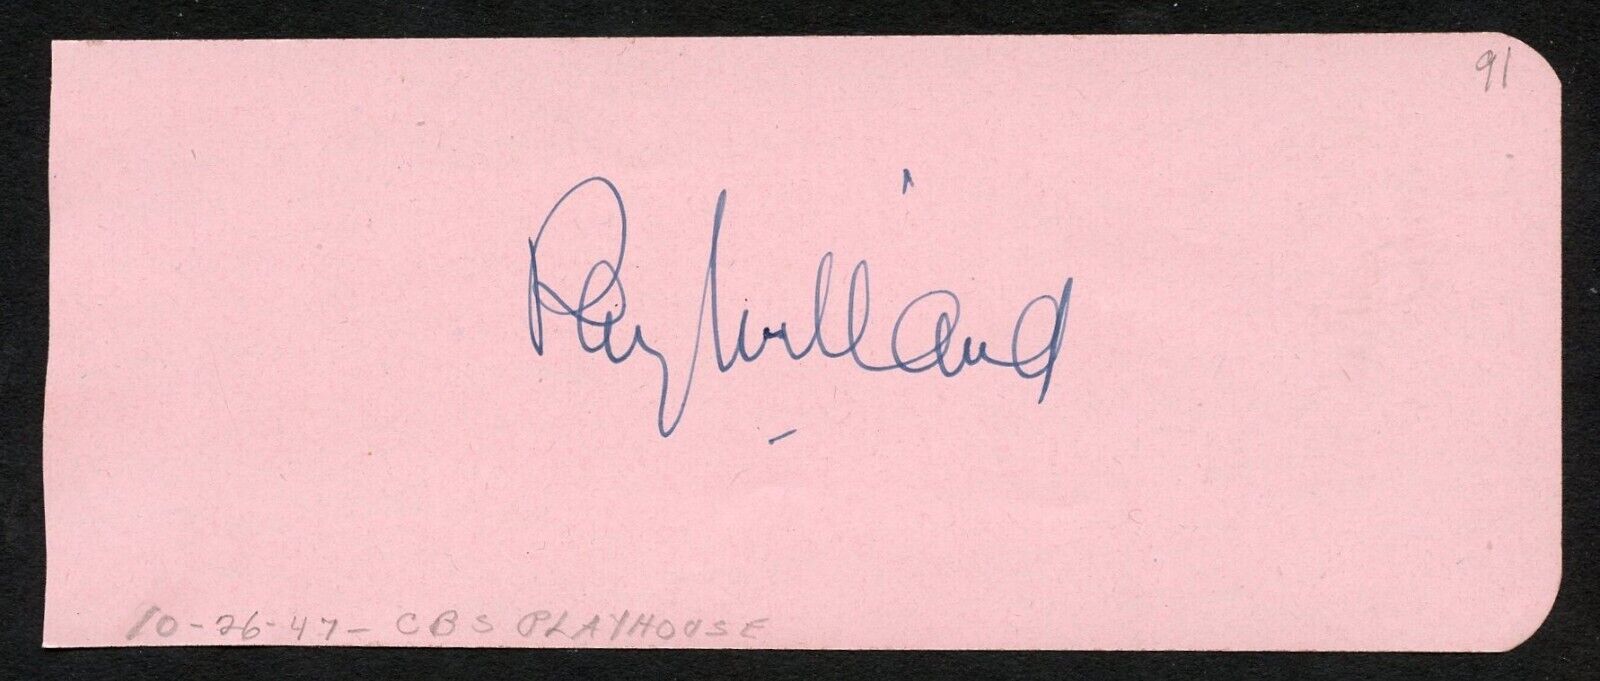 Ray Milland d1986 signed 2x5 cut autograph on 10-26-47 at CBS Playhouse BAS